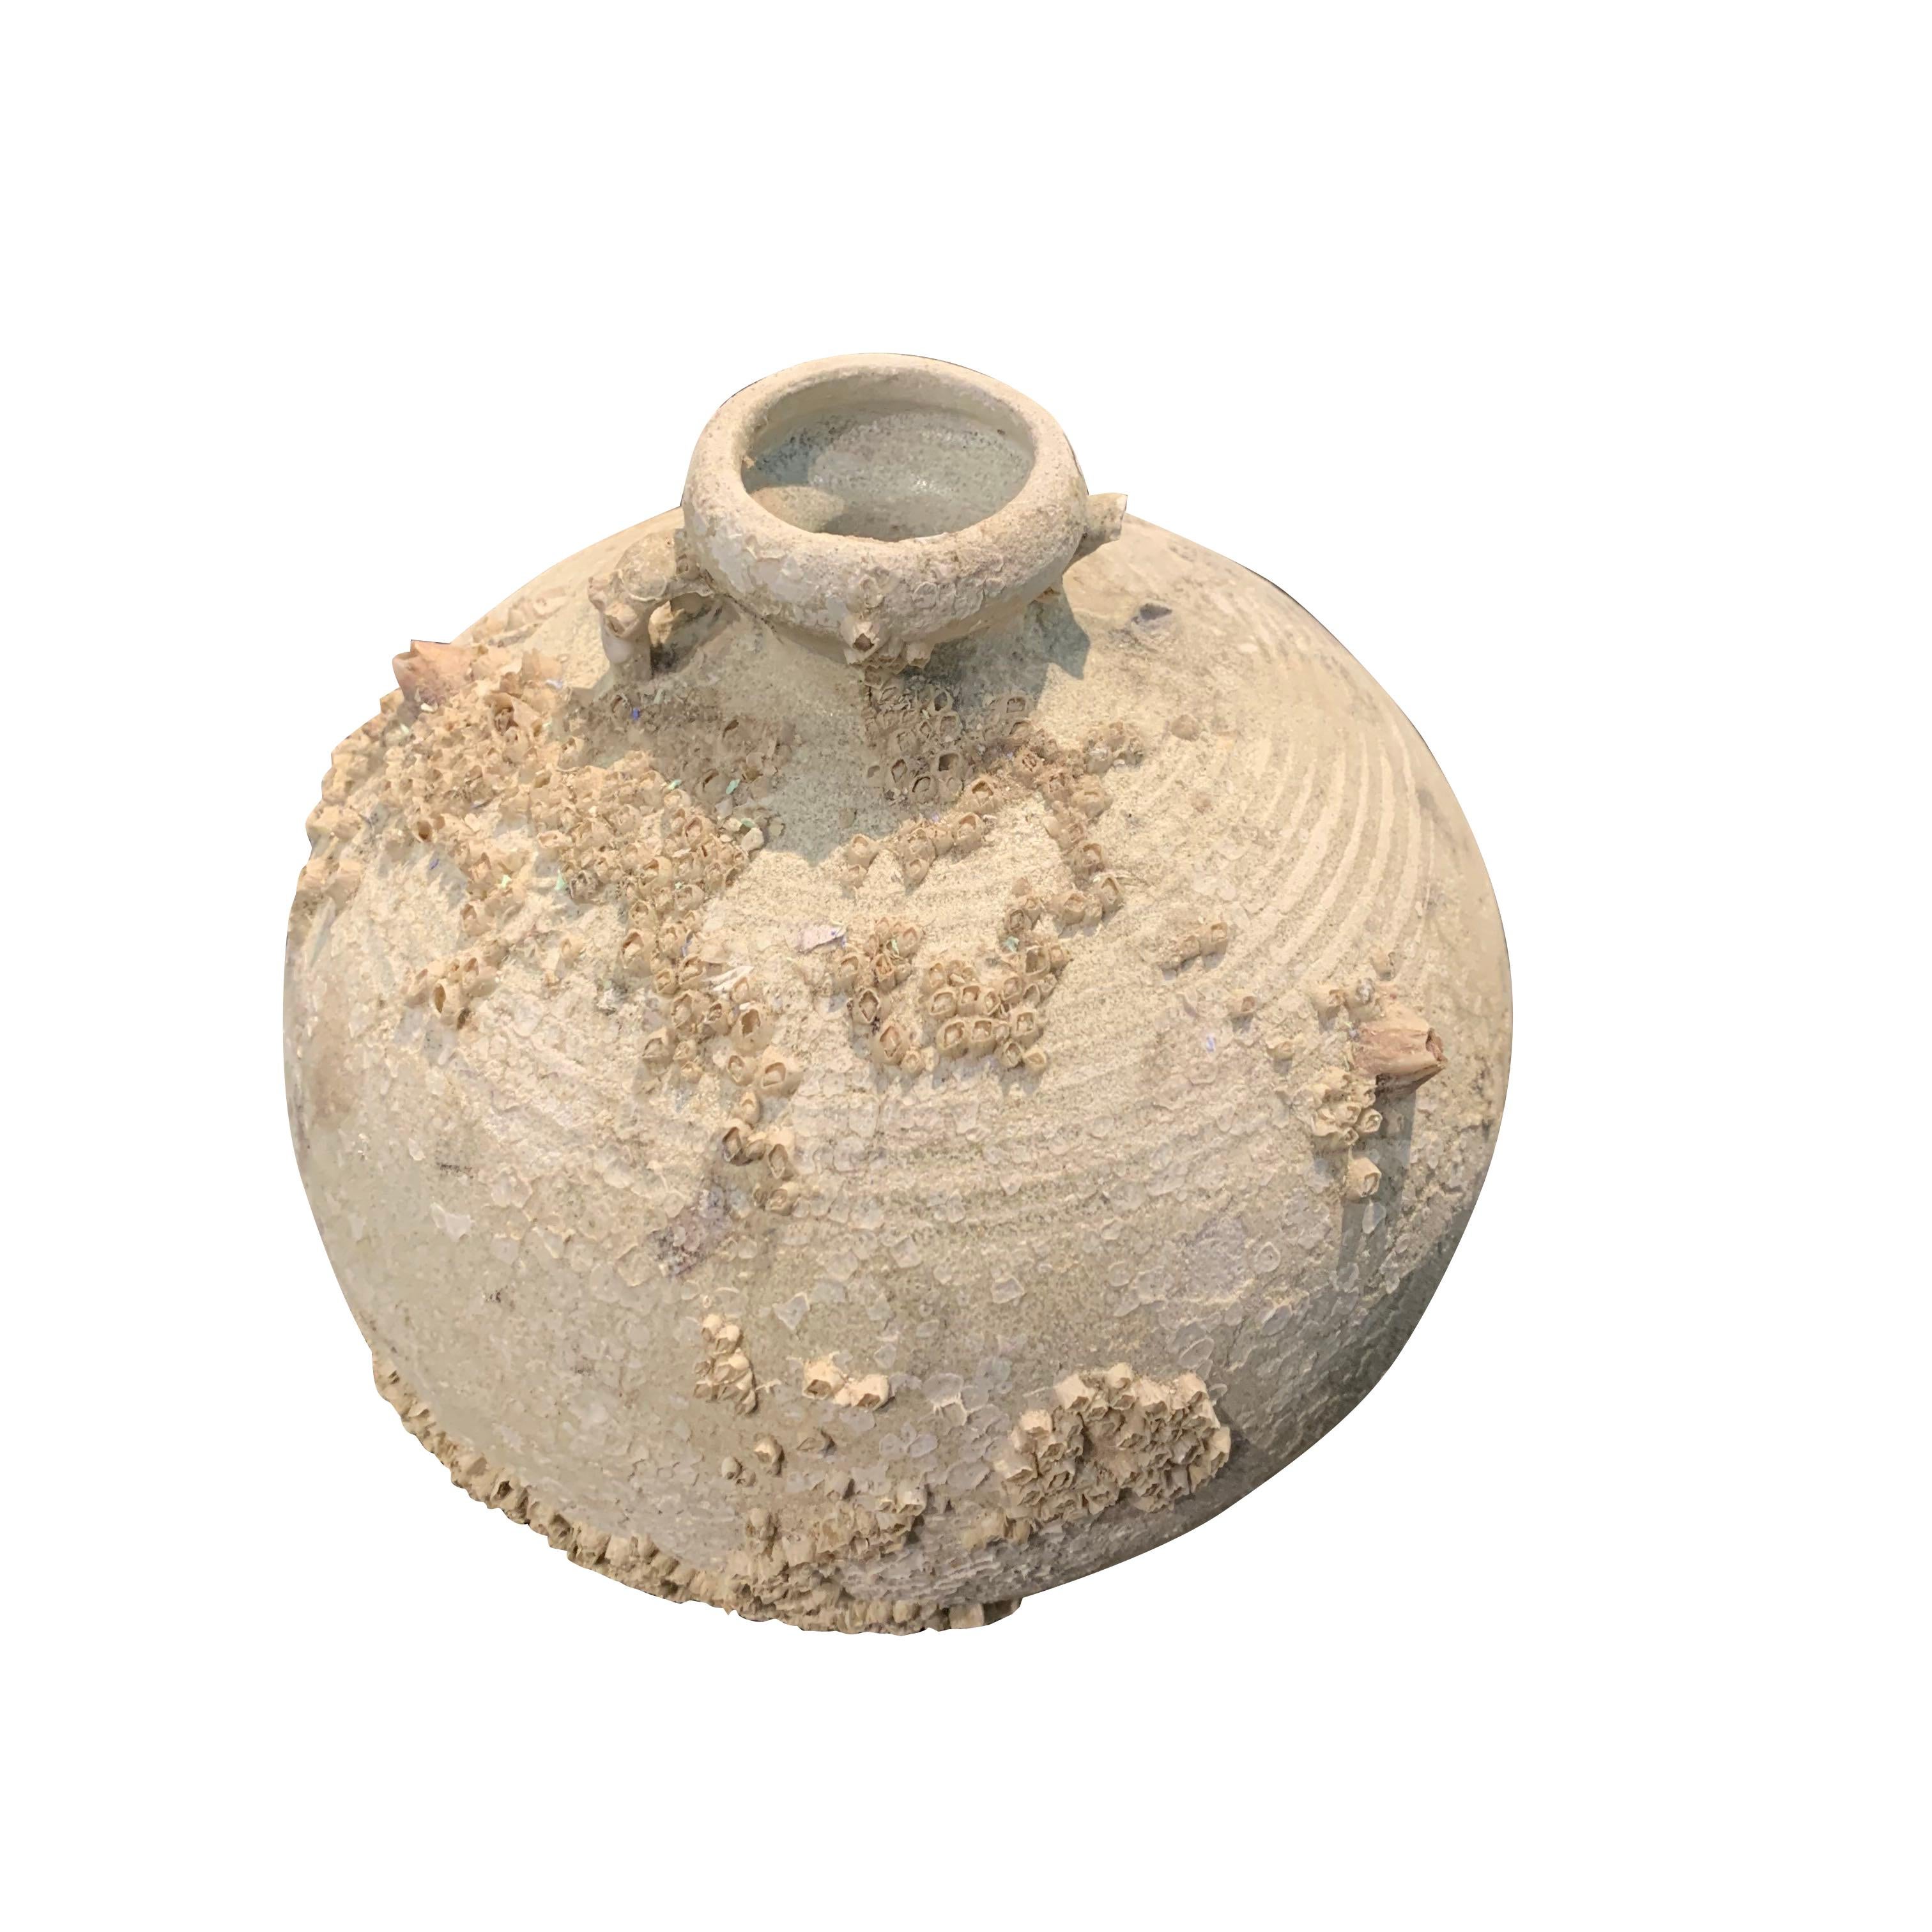 15th century Vietnamese animist neutral terracotta pot.
Animism is the belief that all objects have a spirit.
Shipwrecked, weathered and covered with barnacles which offer an organic dimension to the design of the pot.
Two pots are available.  Both